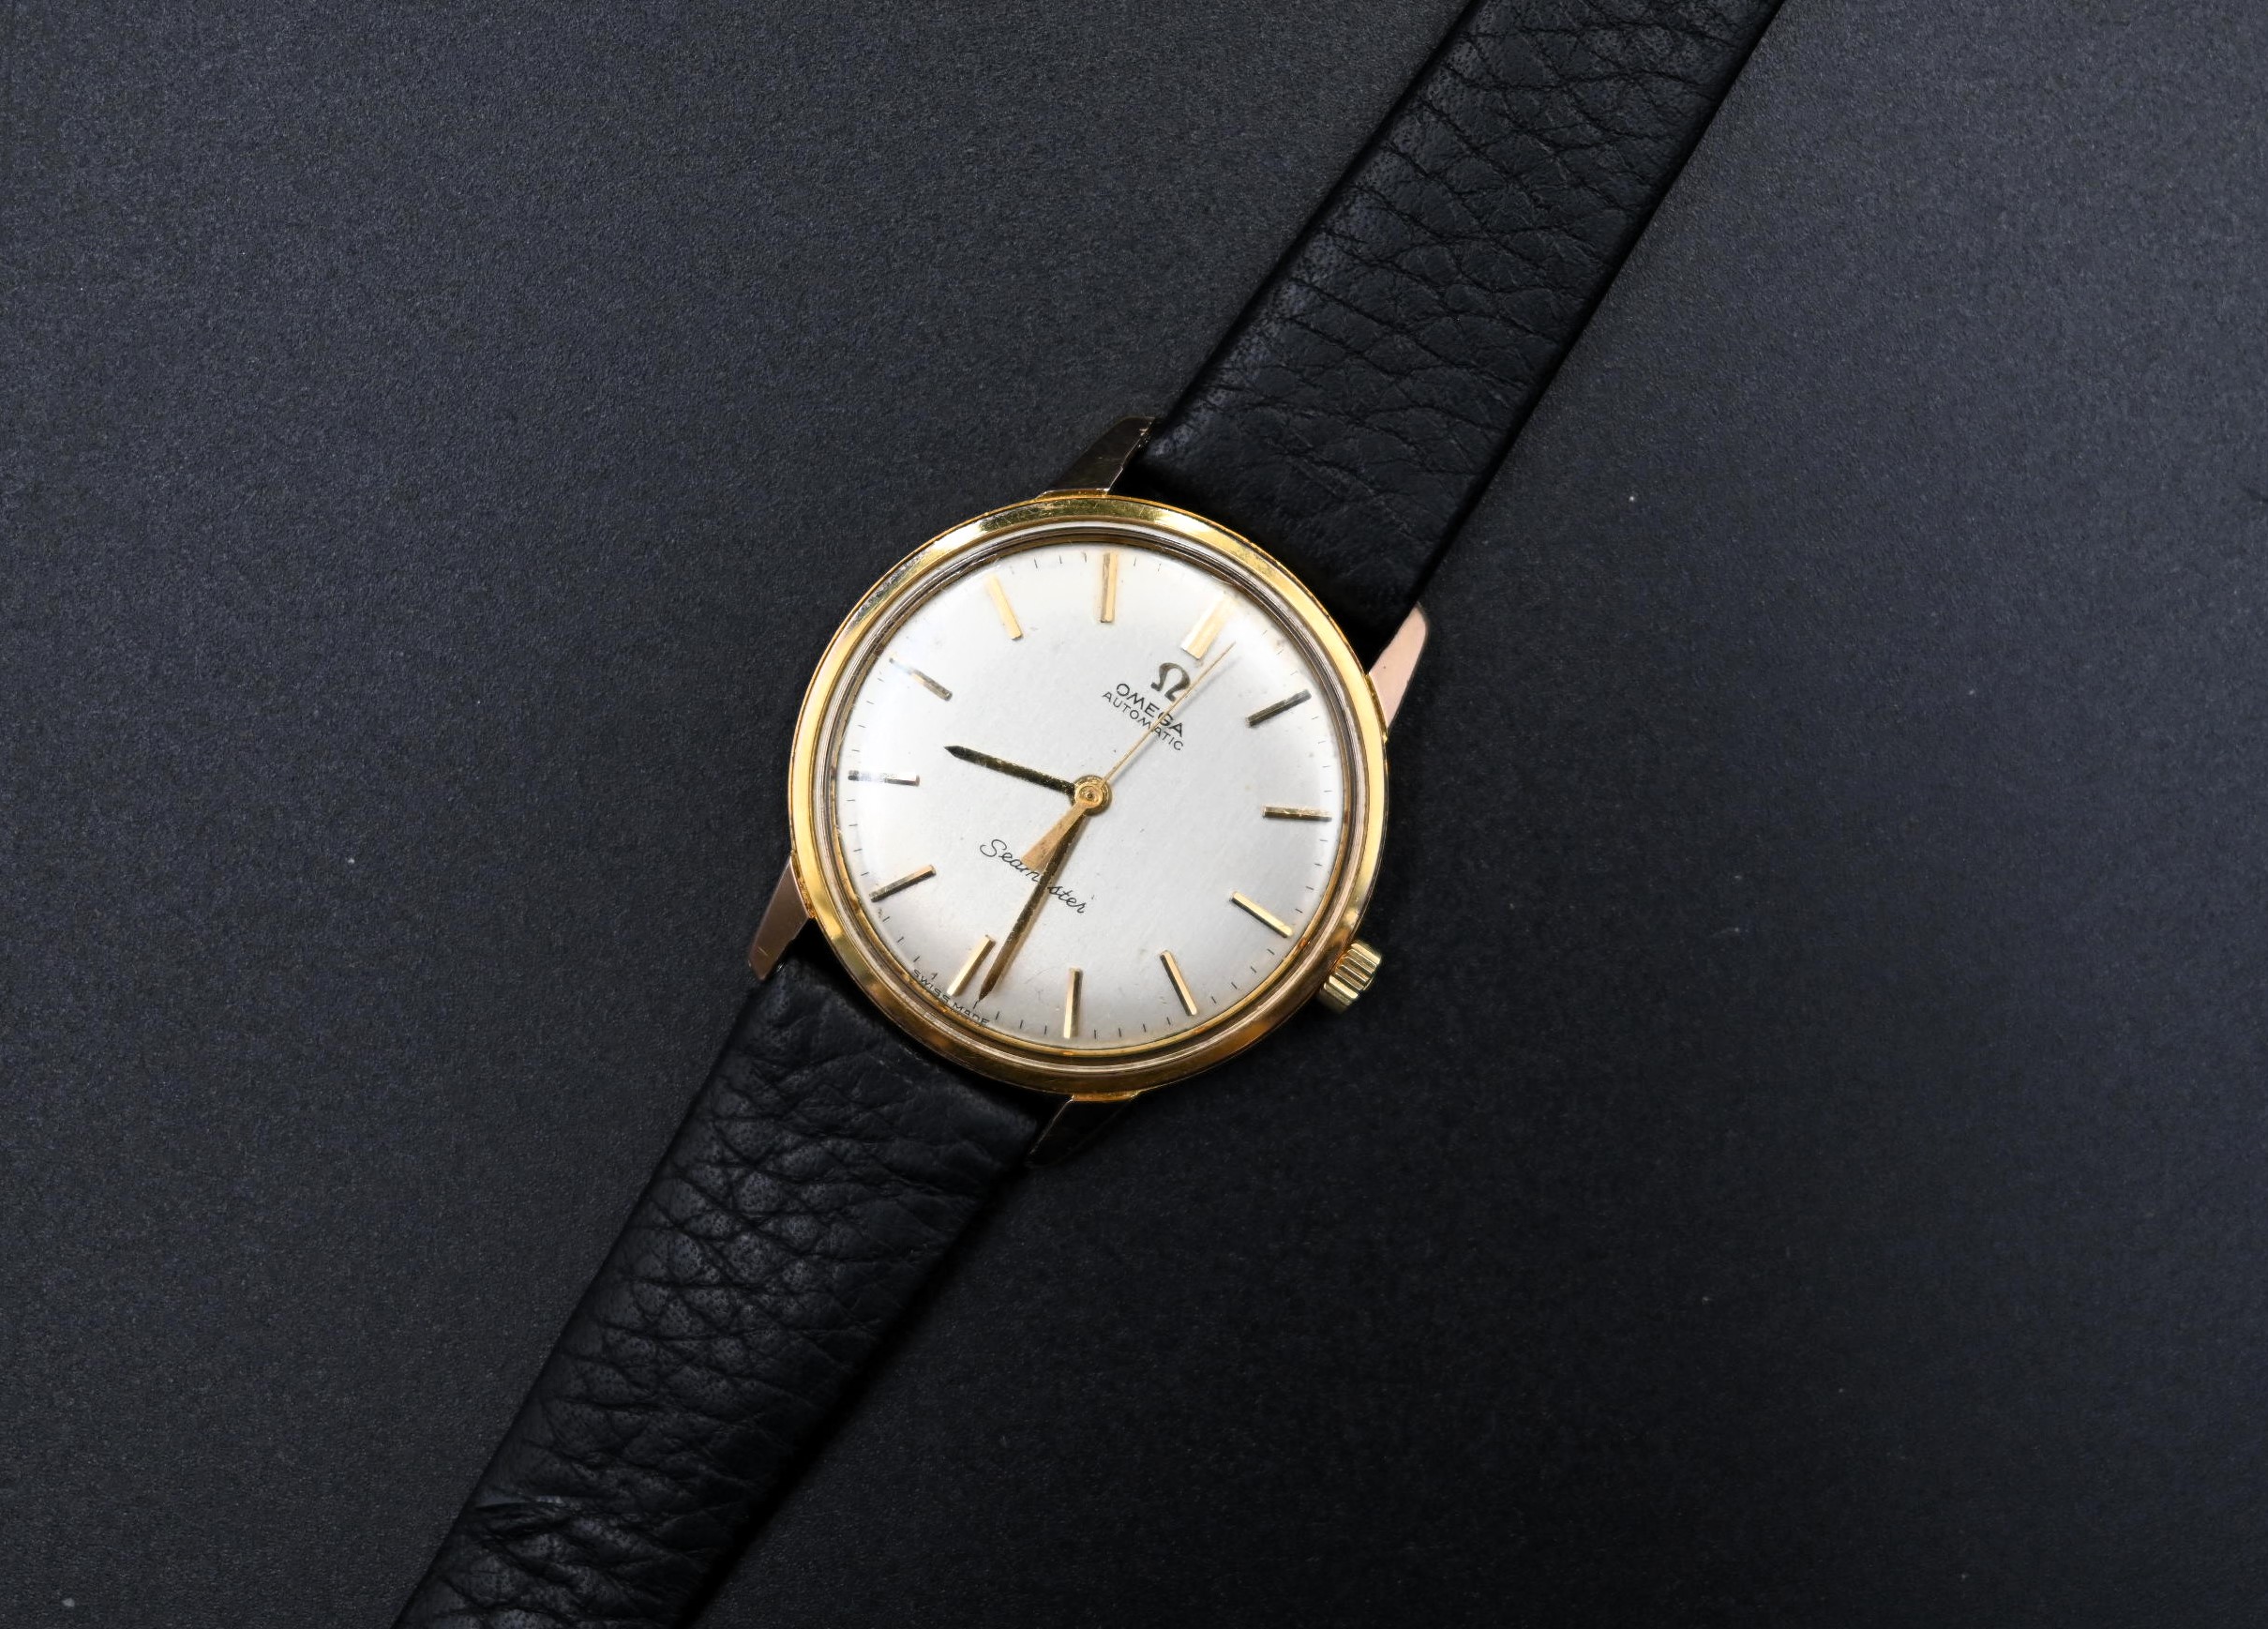 Omega Seamaster Automatic gentleman's gold wristwatch the champagne dial with raised gold baton - Image 2 of 4